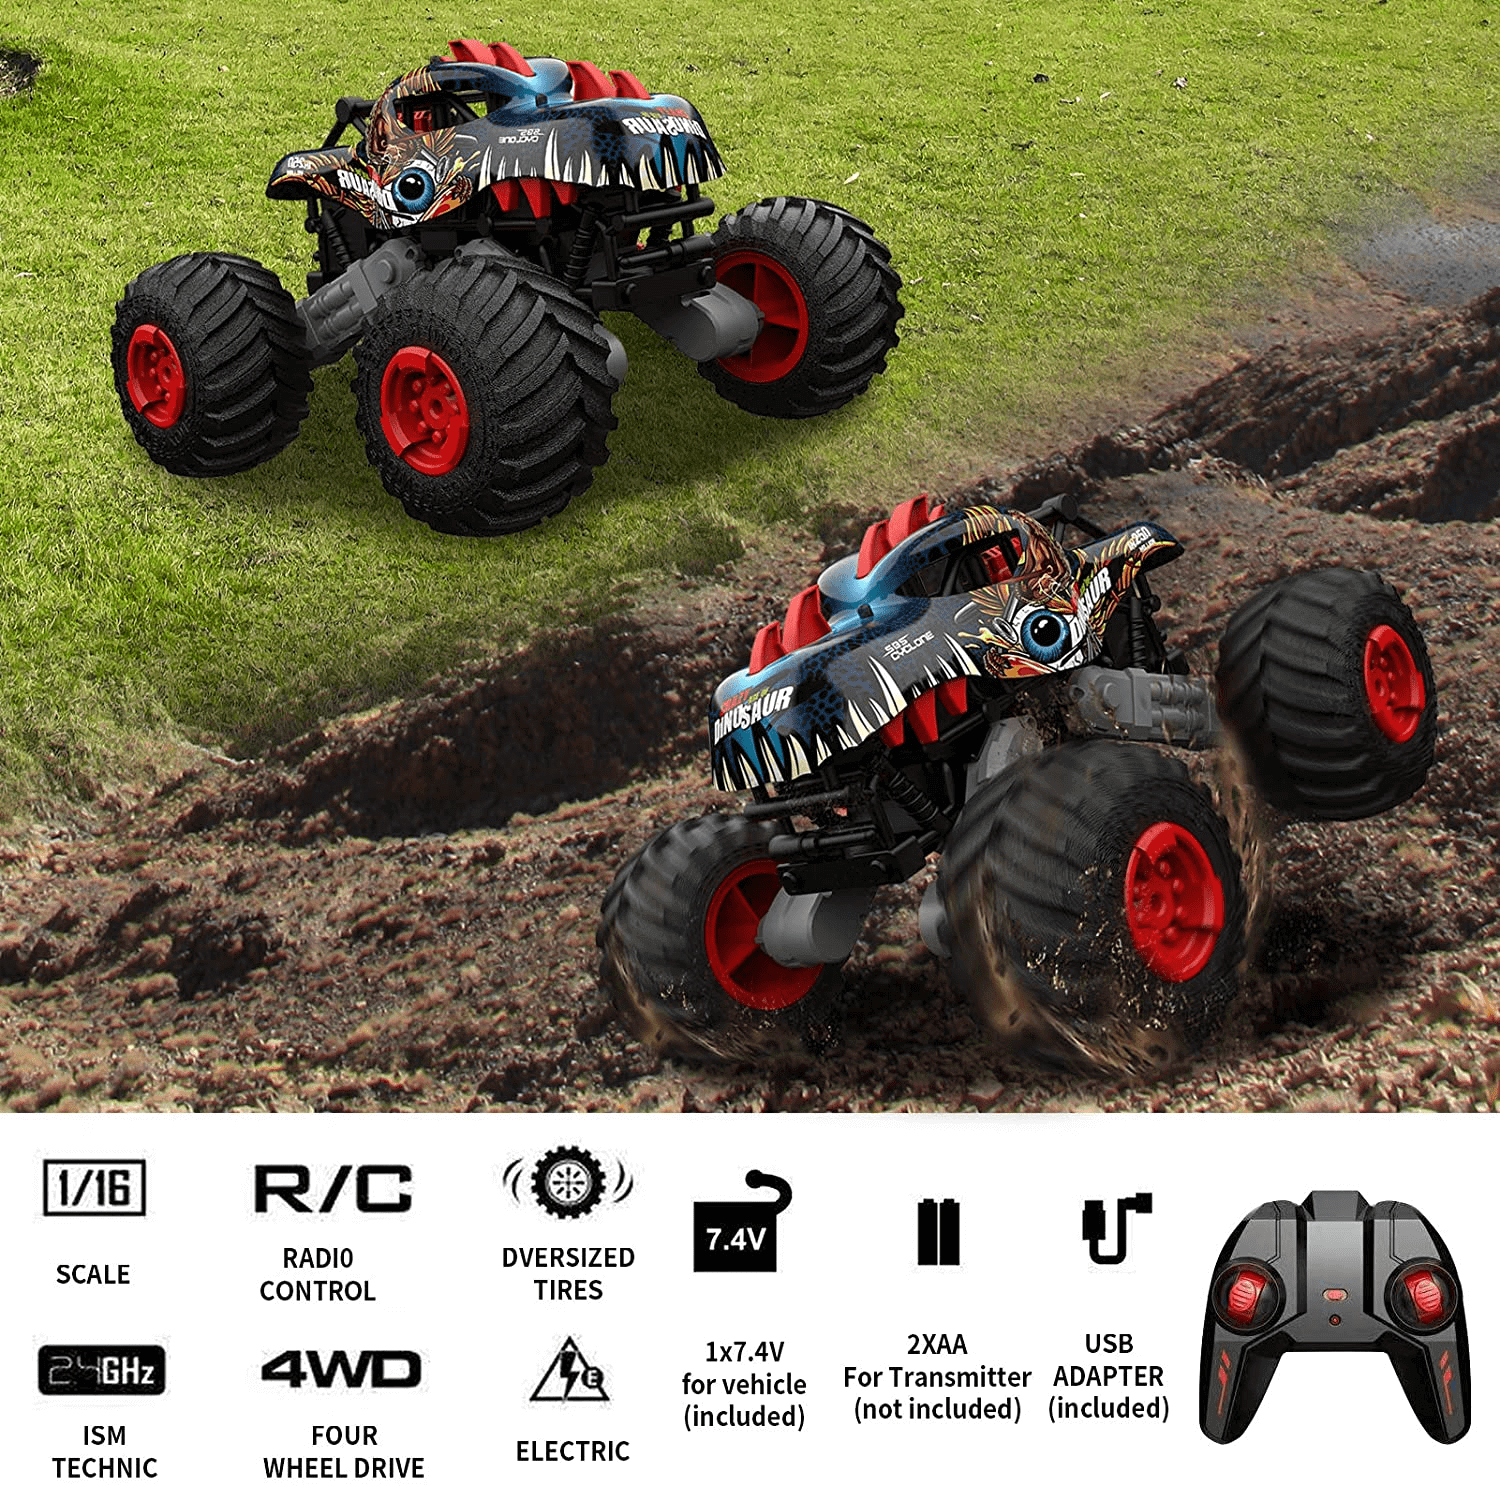 RC Dinosaur Cars 1:16 Remote Control Monster Truck Off-road 4WD Climbing Car for Kids Birthday Christmas Gift